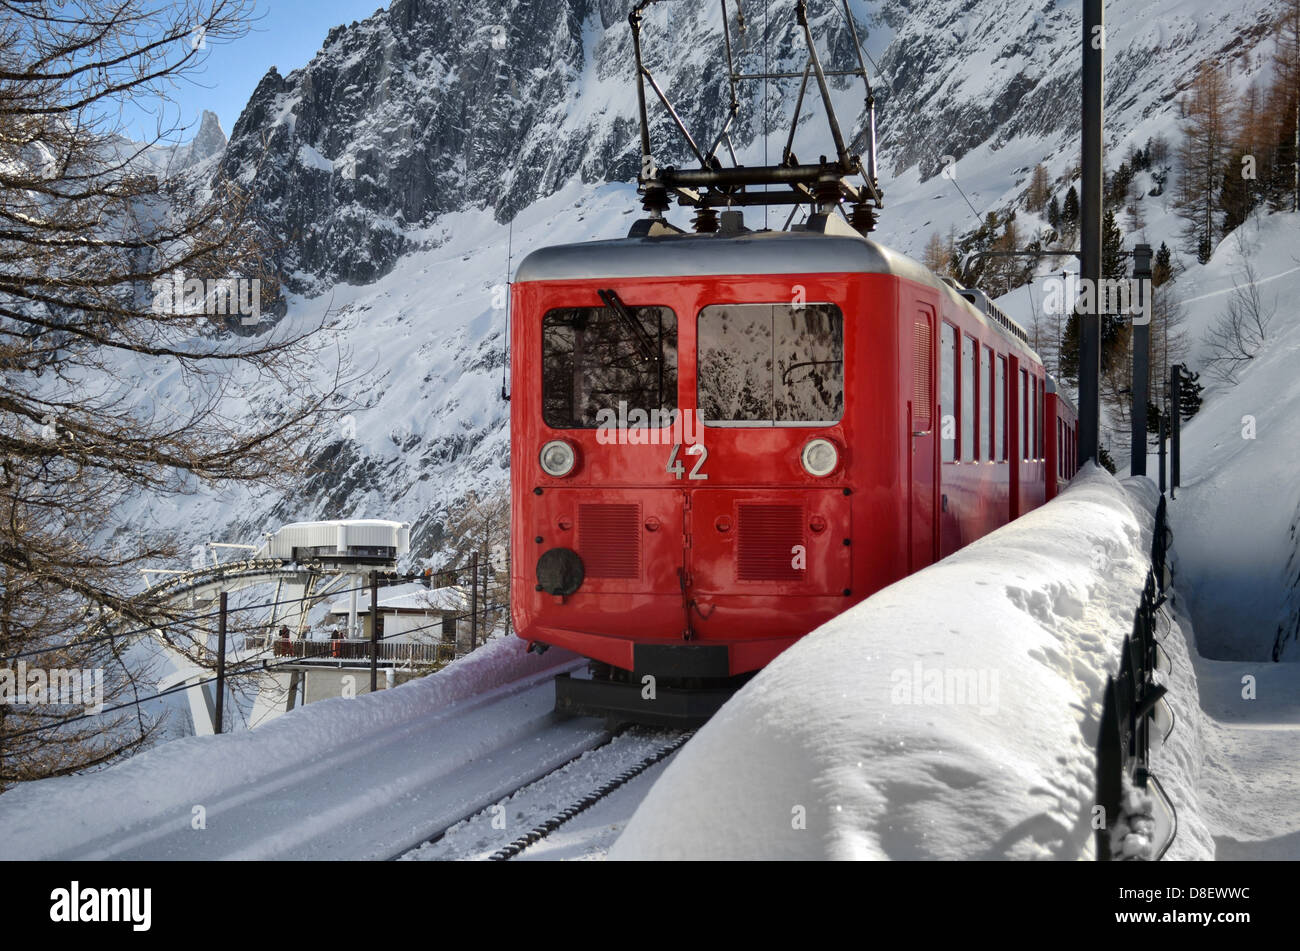 Small, red mountain train climbing railway in the snow Stock Photo